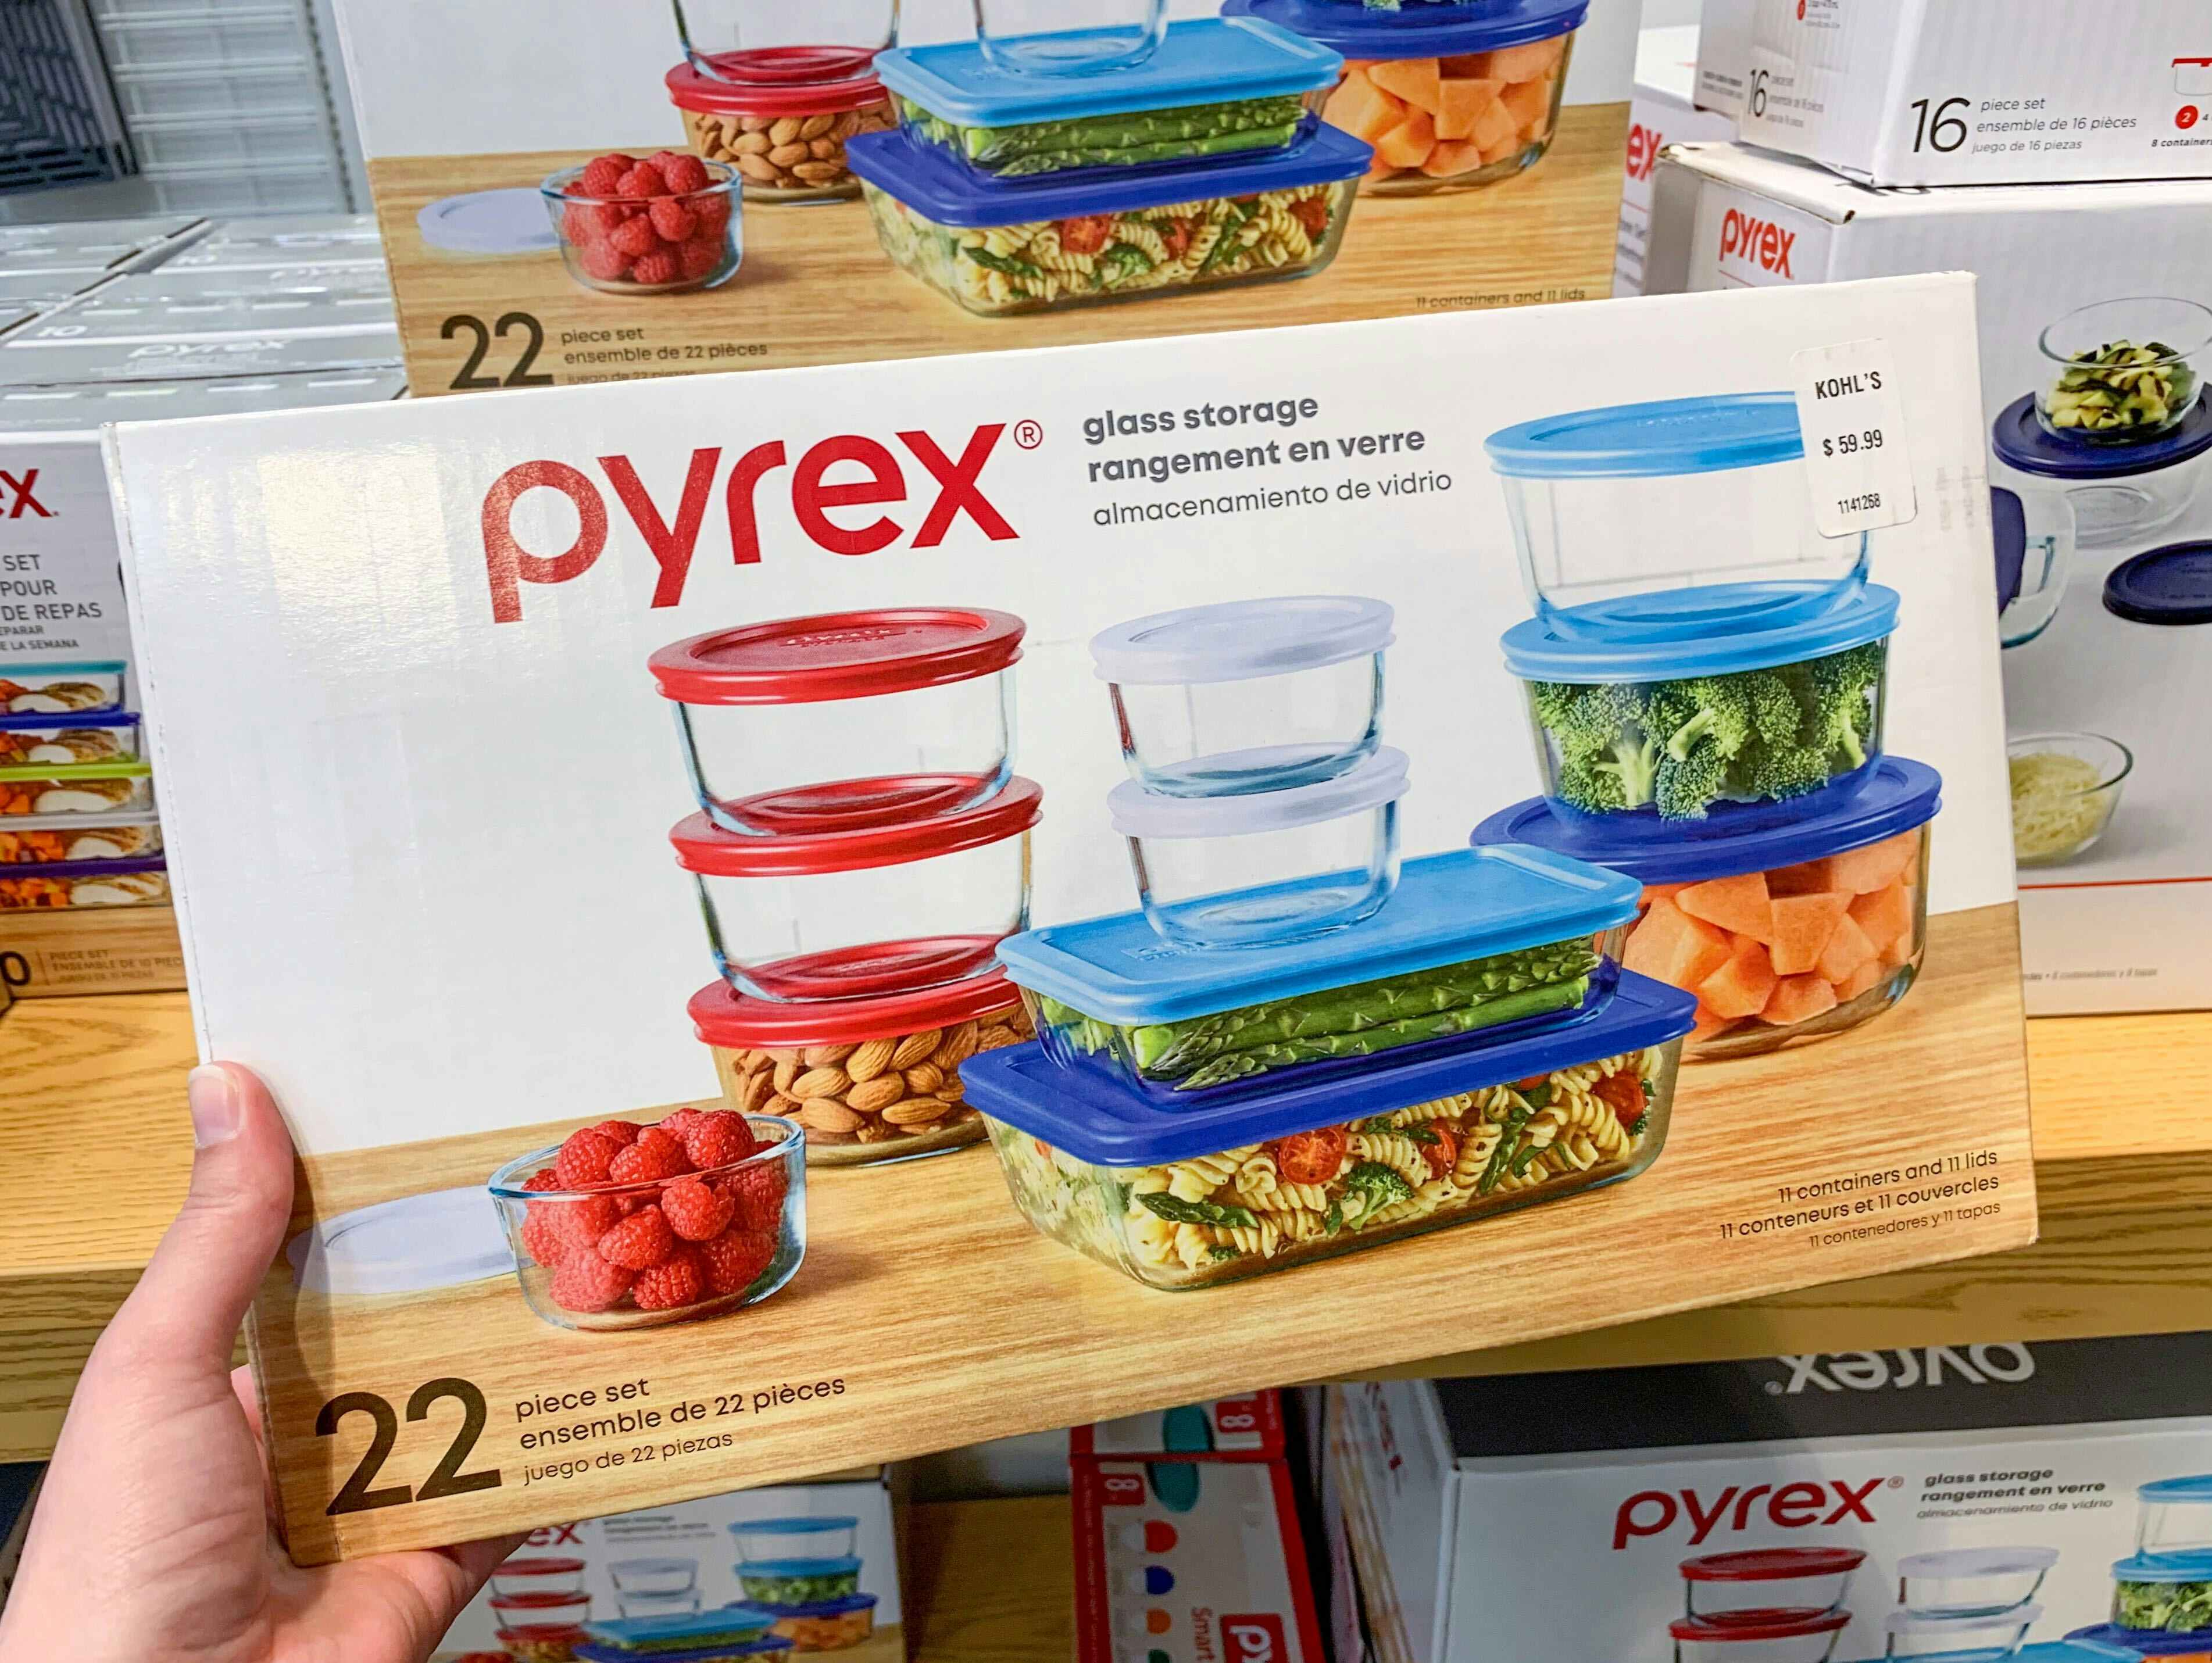 Pyrex 22-Piece Glass Storage Set, Only $20.89 at Target - The